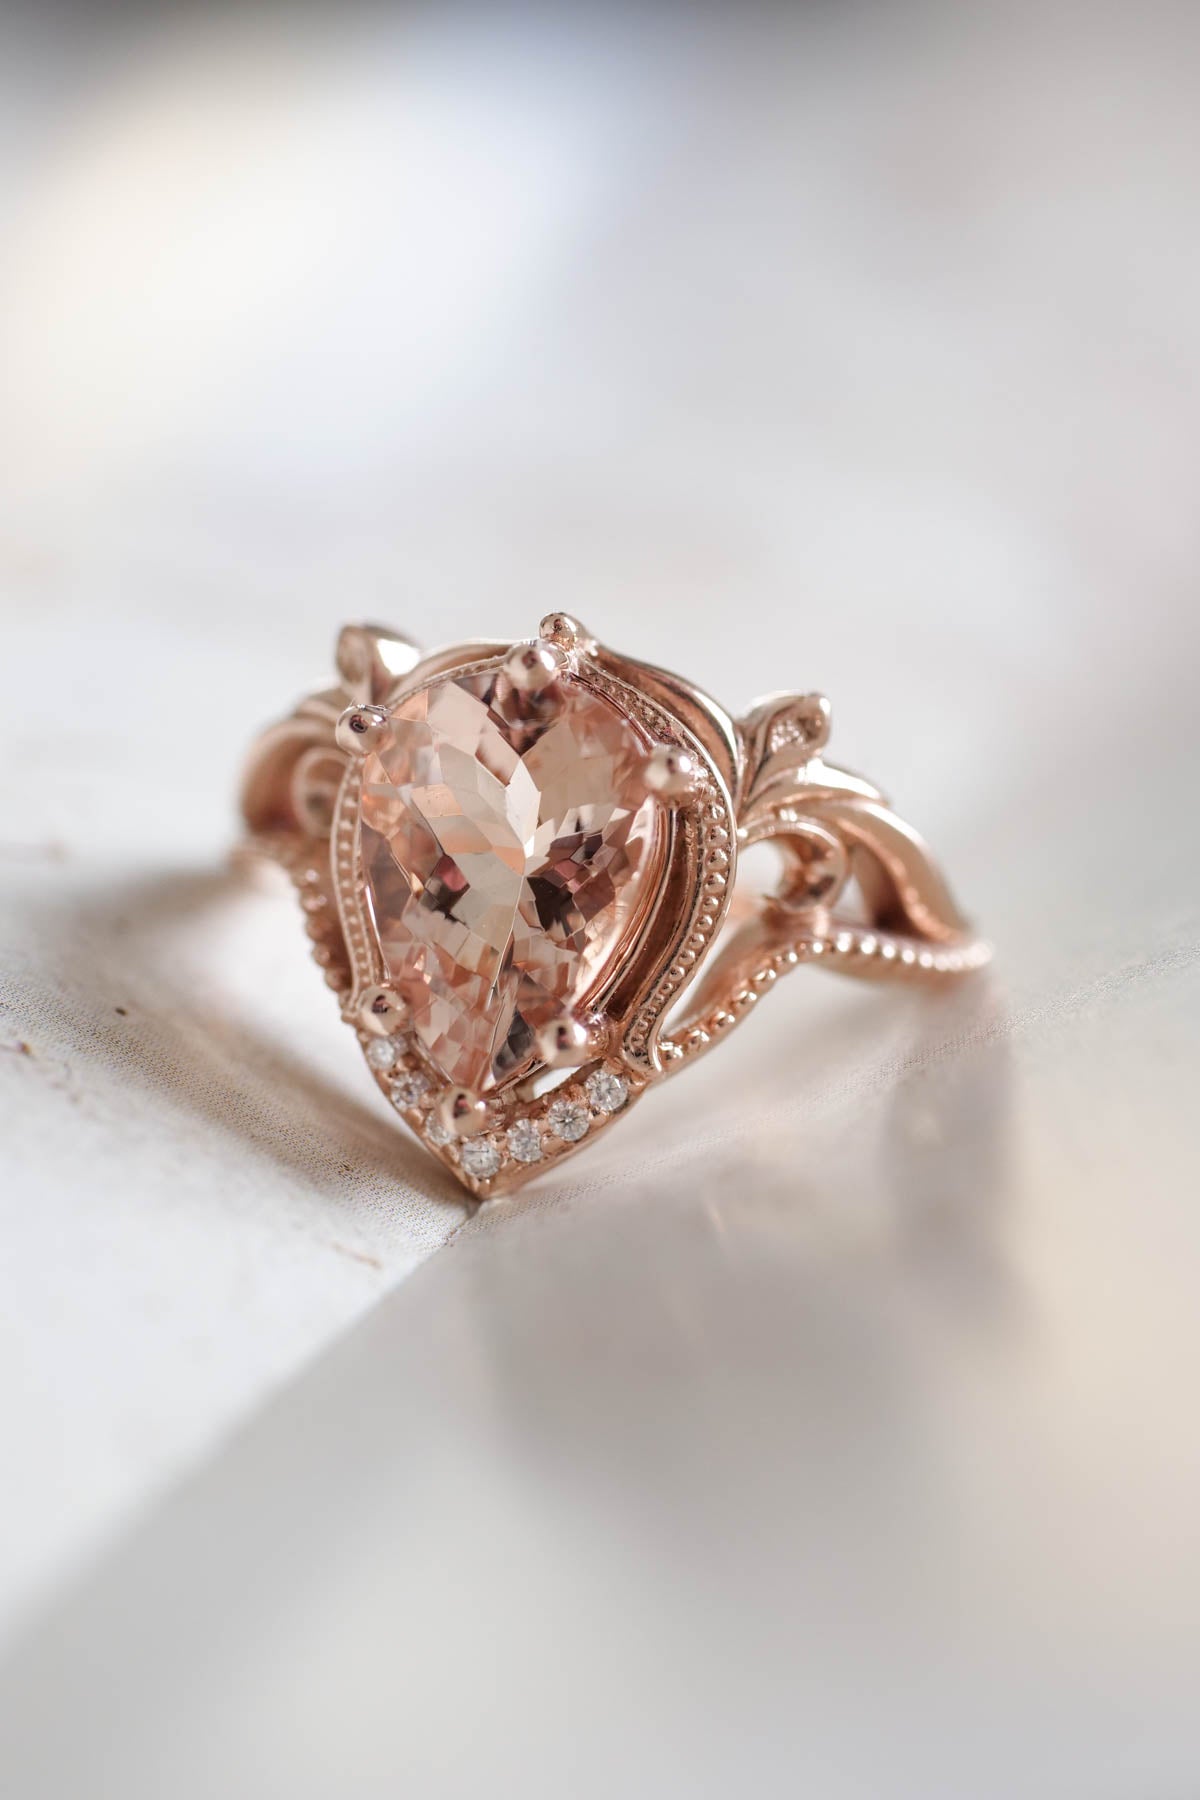 READY TO SHIP: Lida ring set in 14K rose gold, peach morganite 10x7 mm, moissanites, RING SIZE 5.5 US - Eden Garden Jewelry™